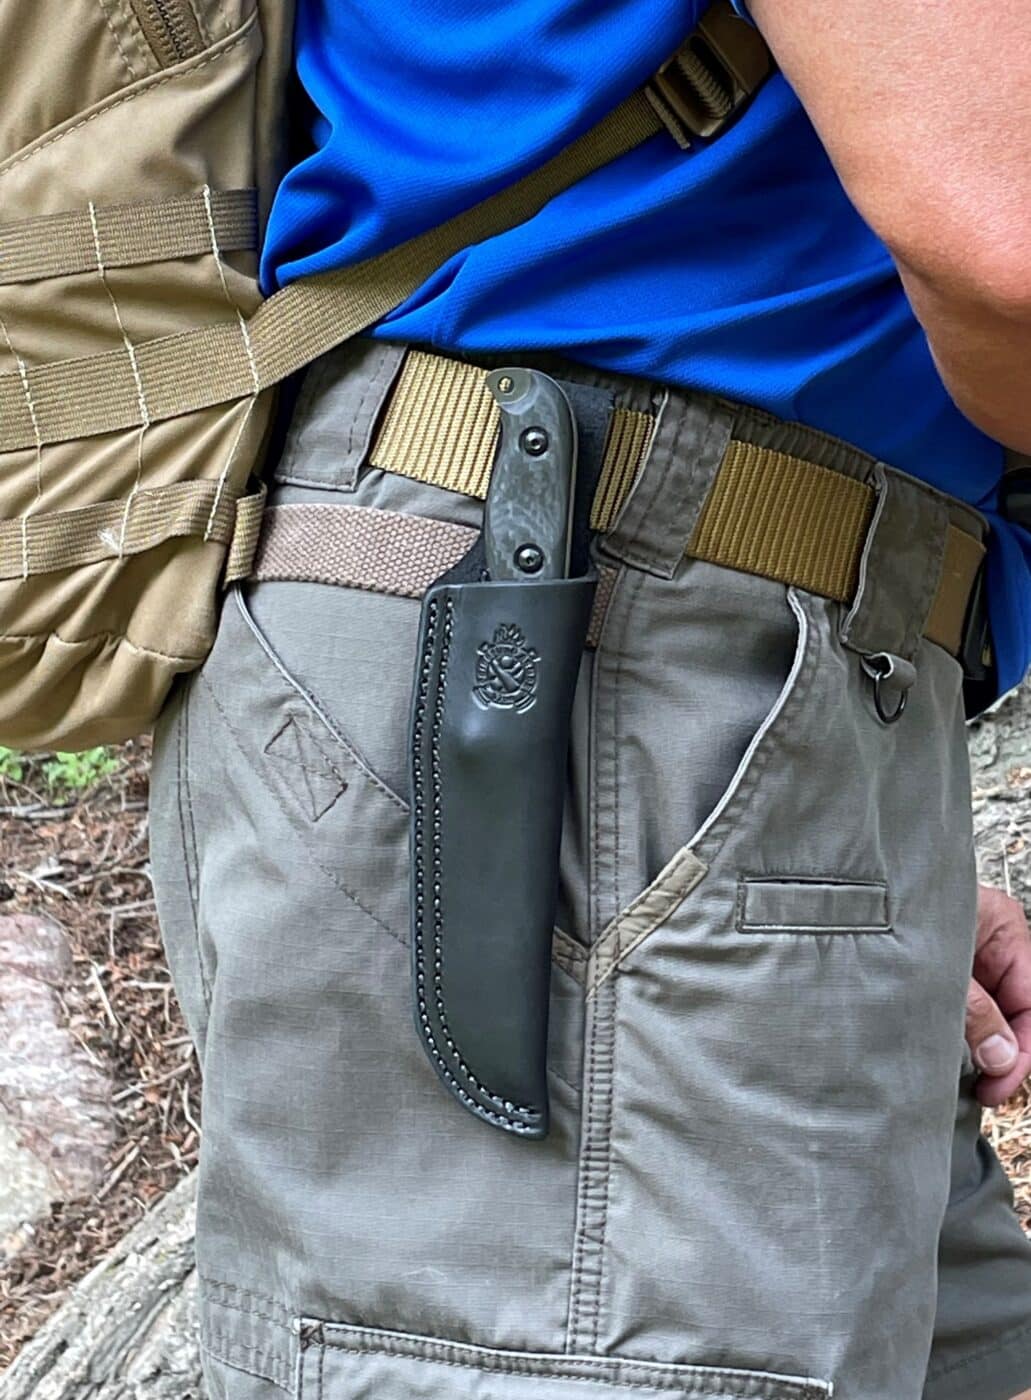 carrying the Springfield Armory Model 2020 knife while hiking